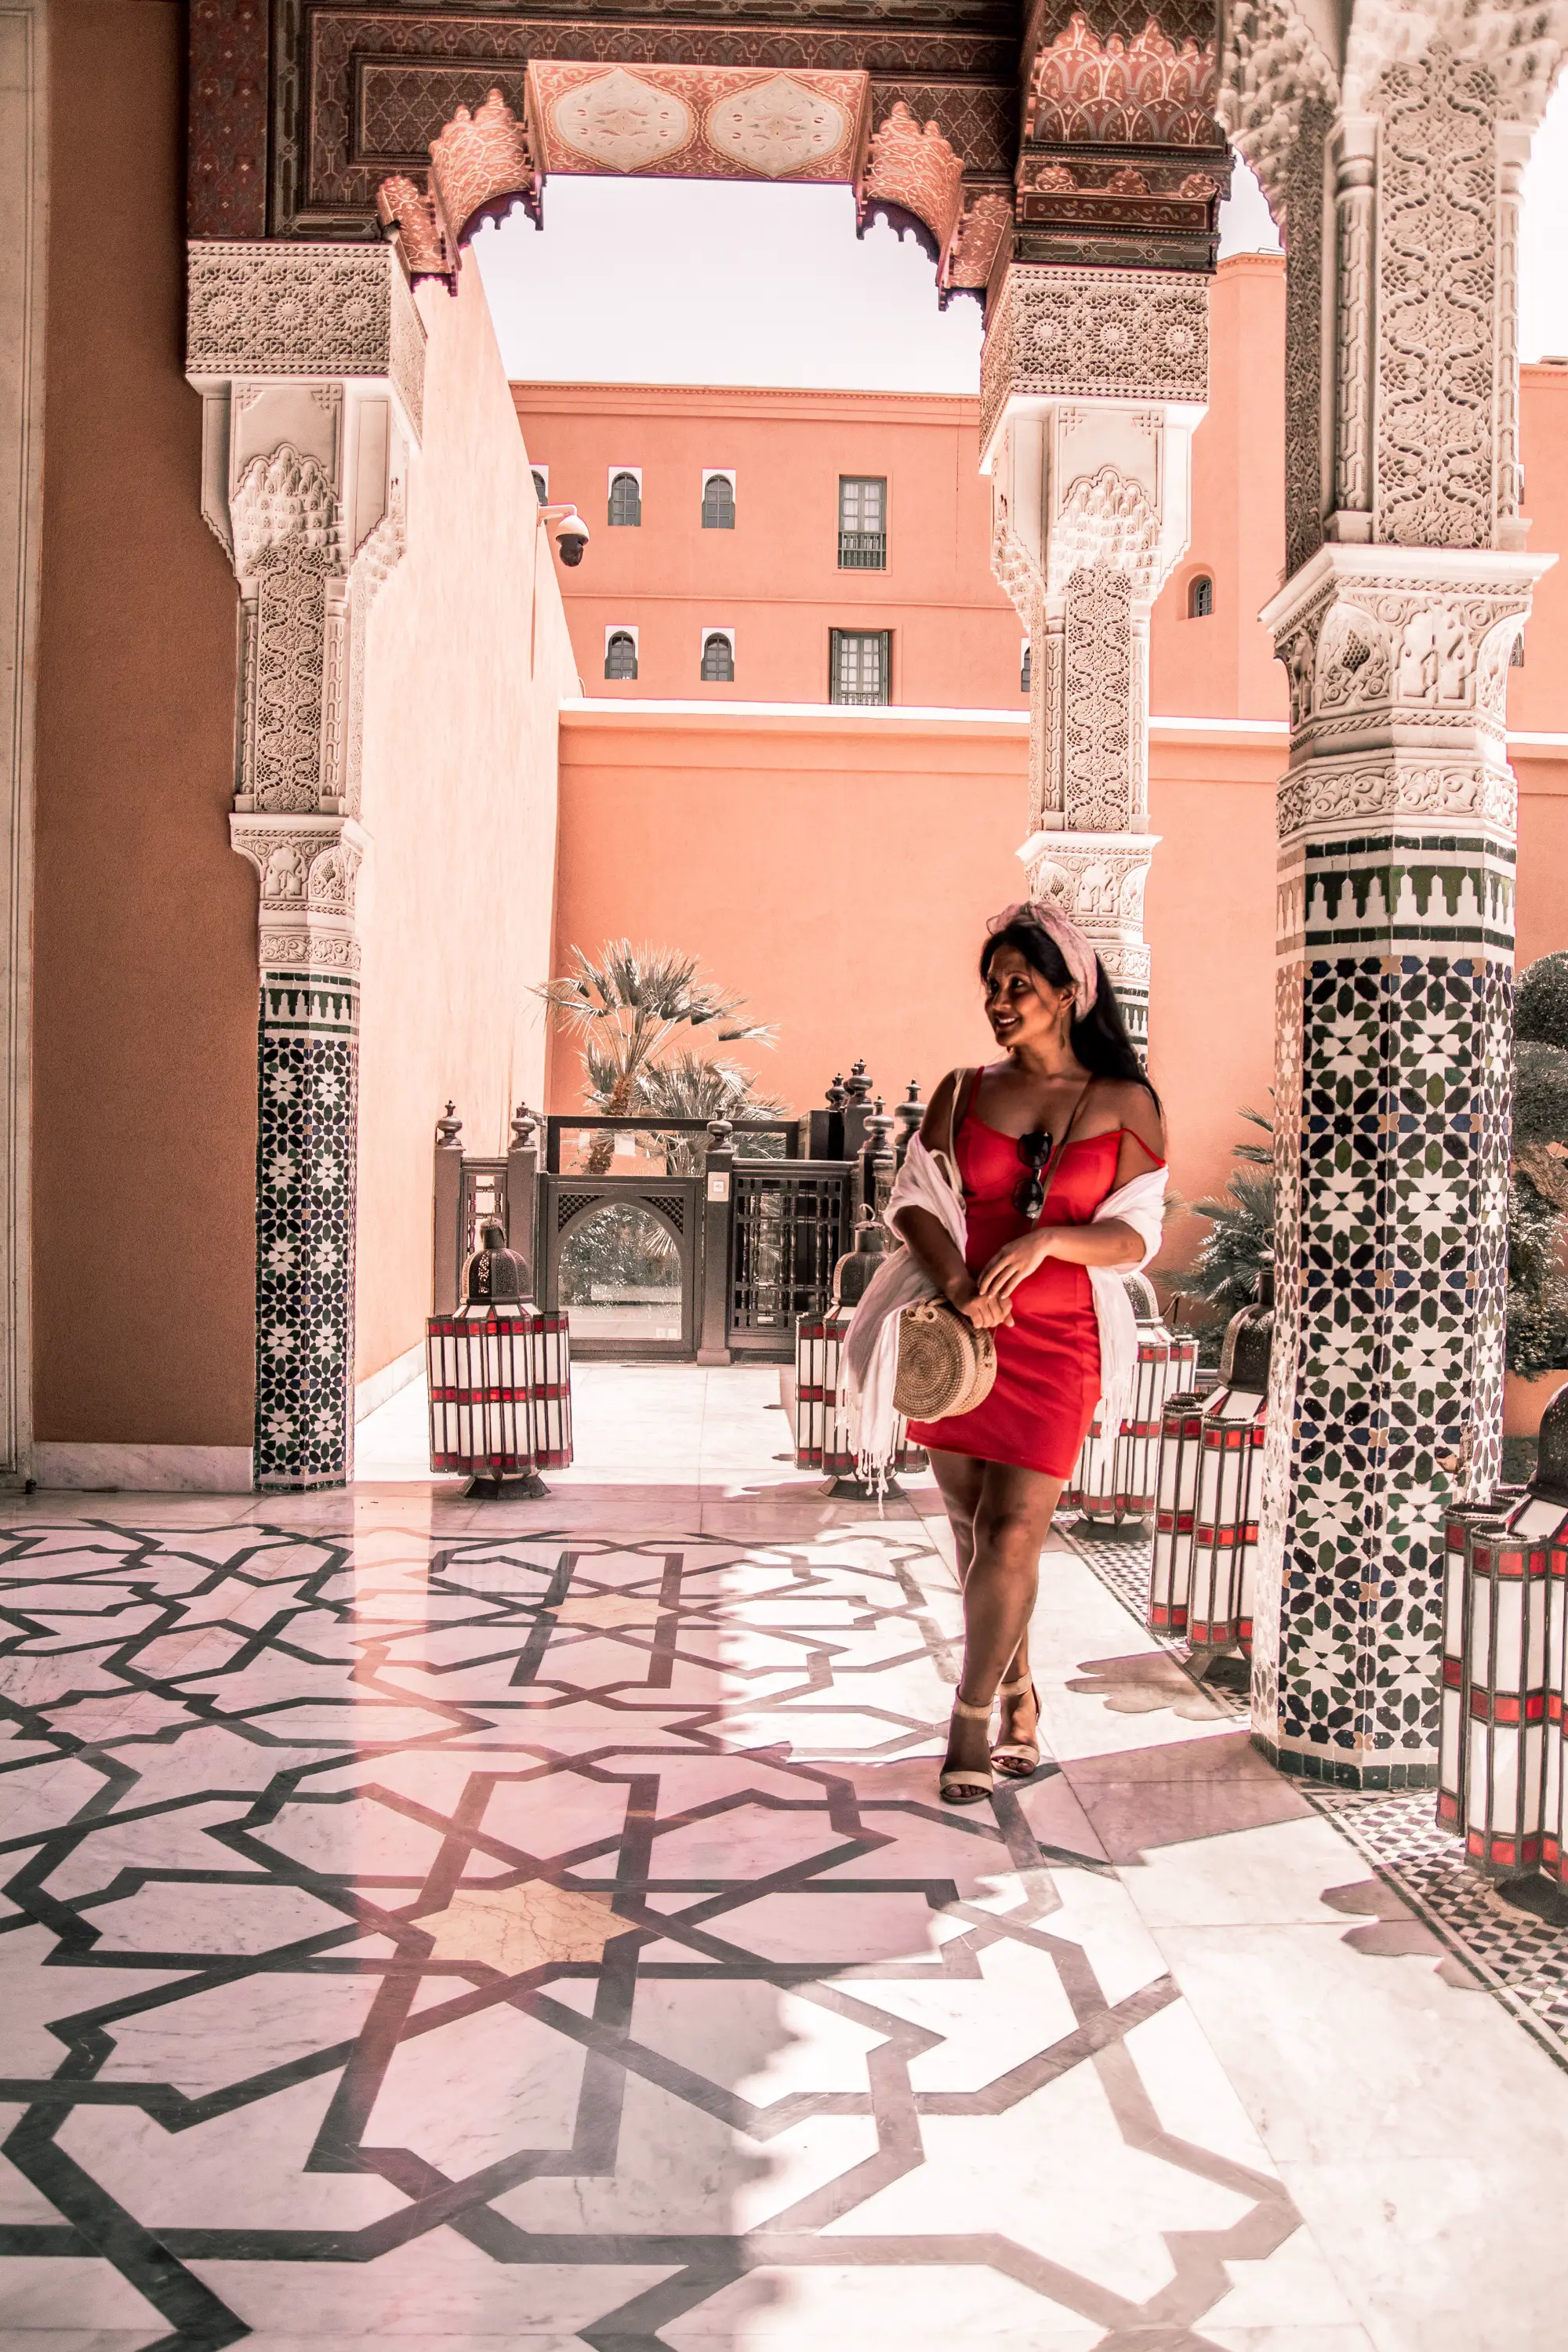 What Color Shoes To Wear With A Red Dress How To Wear A Summer Red Dress What To Wear In Morocco Marrakech Paris Chic Style 9